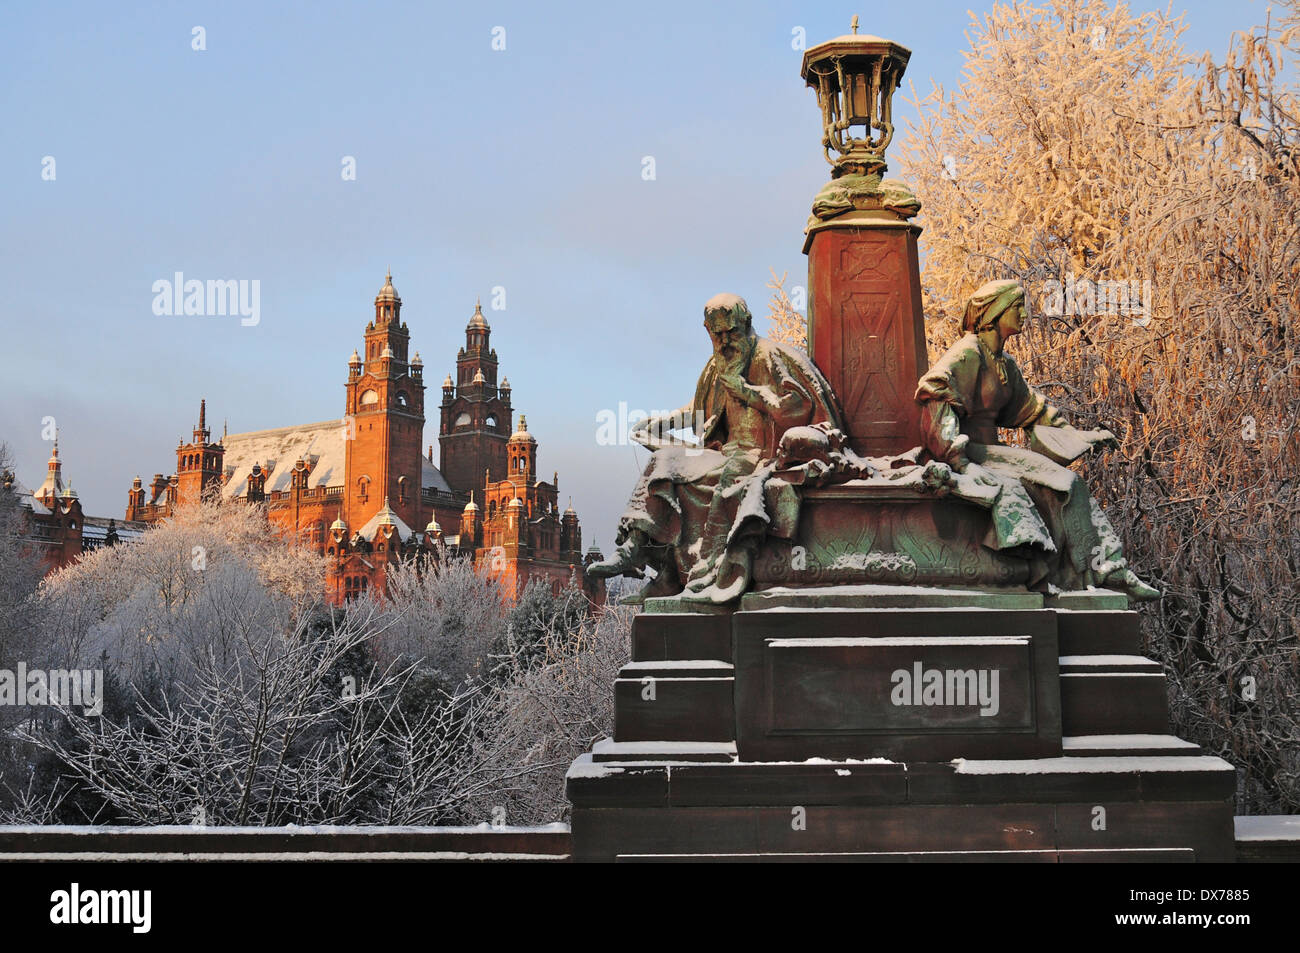 Statues on Kelvin Way by Kelvingrove Park,Glasgow,Scotland,dusted with snow and frost.Kelvingrove Art Gallery in the background Stock Photo